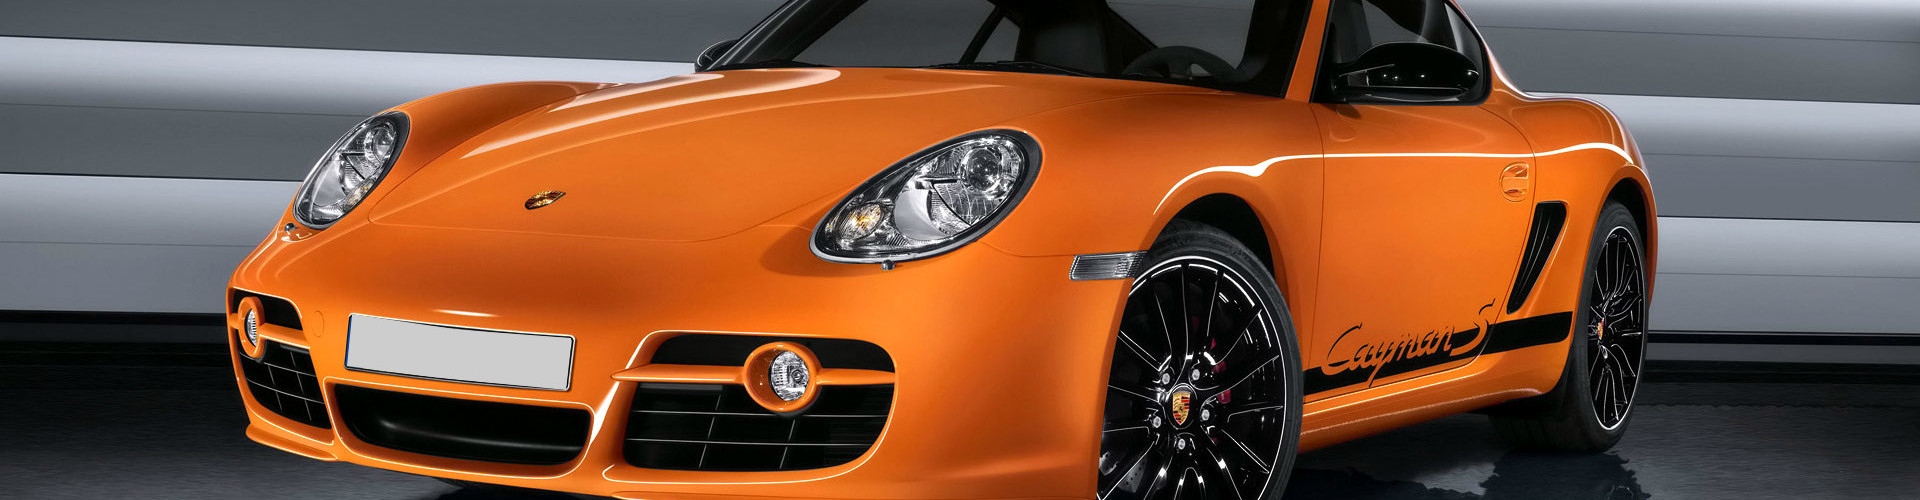 Used Porsche Cayman Buyers Guide